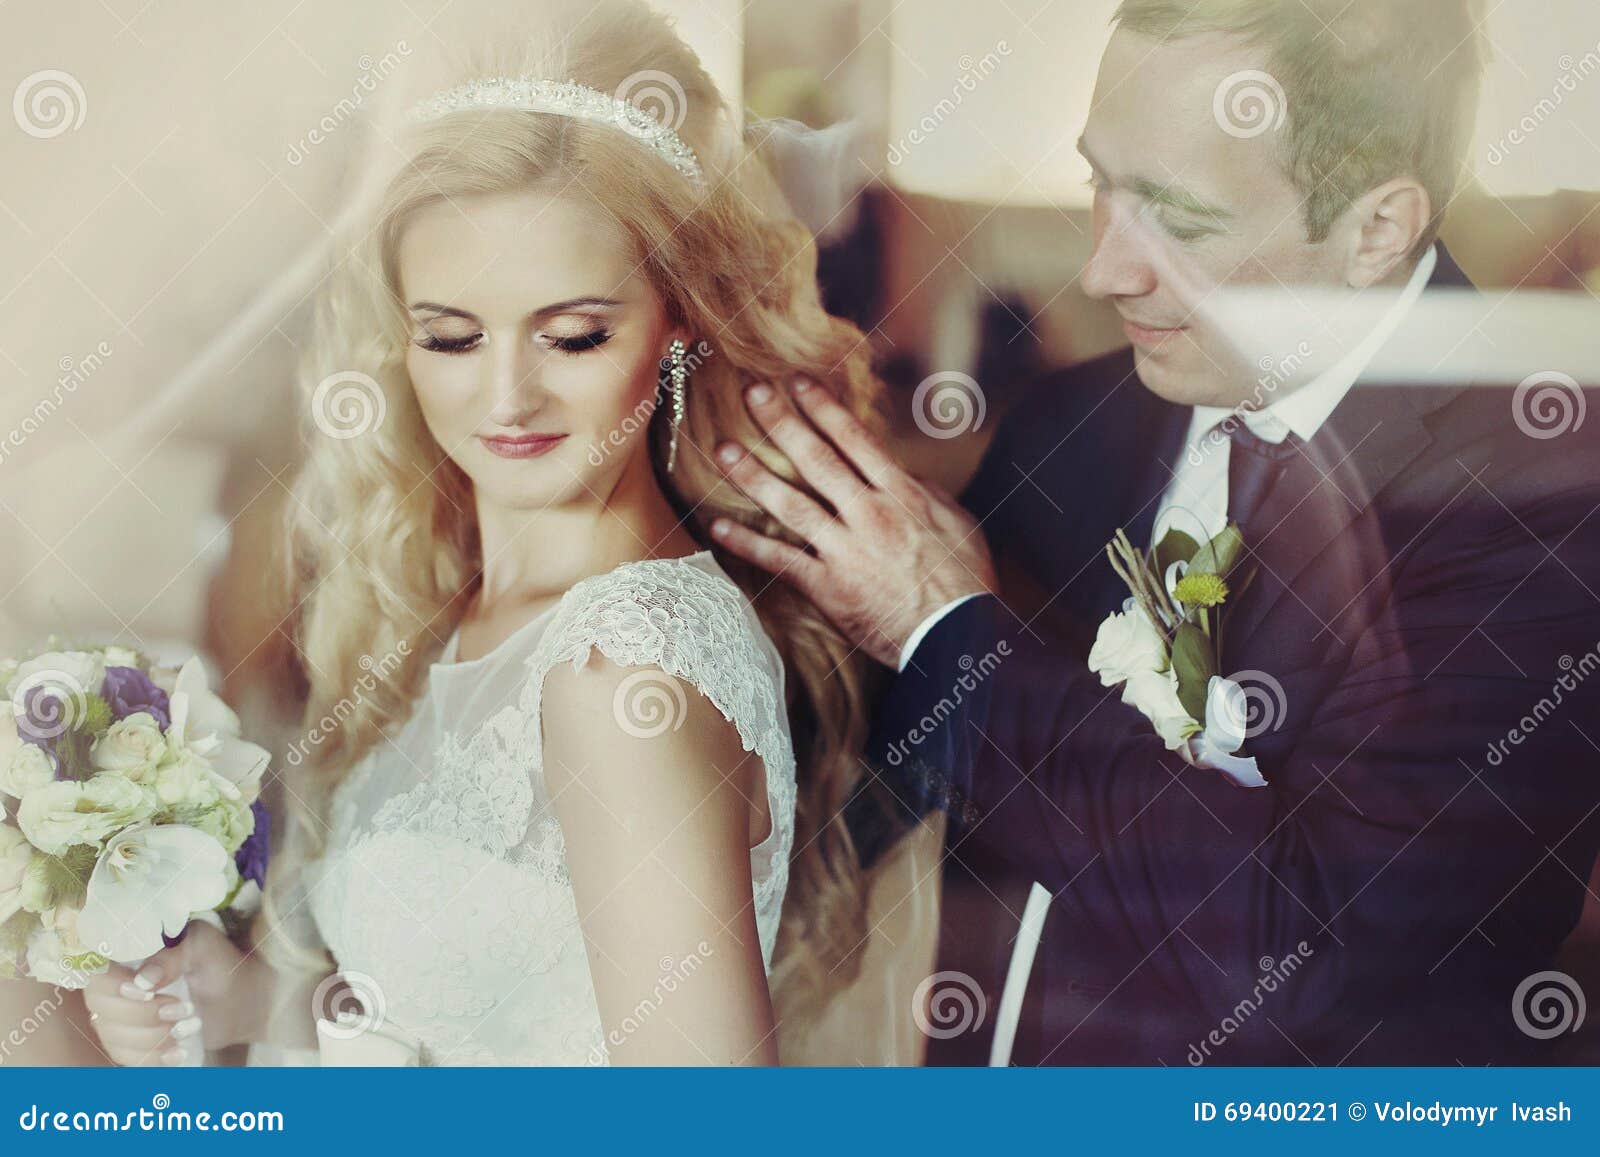 1. Blonde groom with stylish hair - wide 3